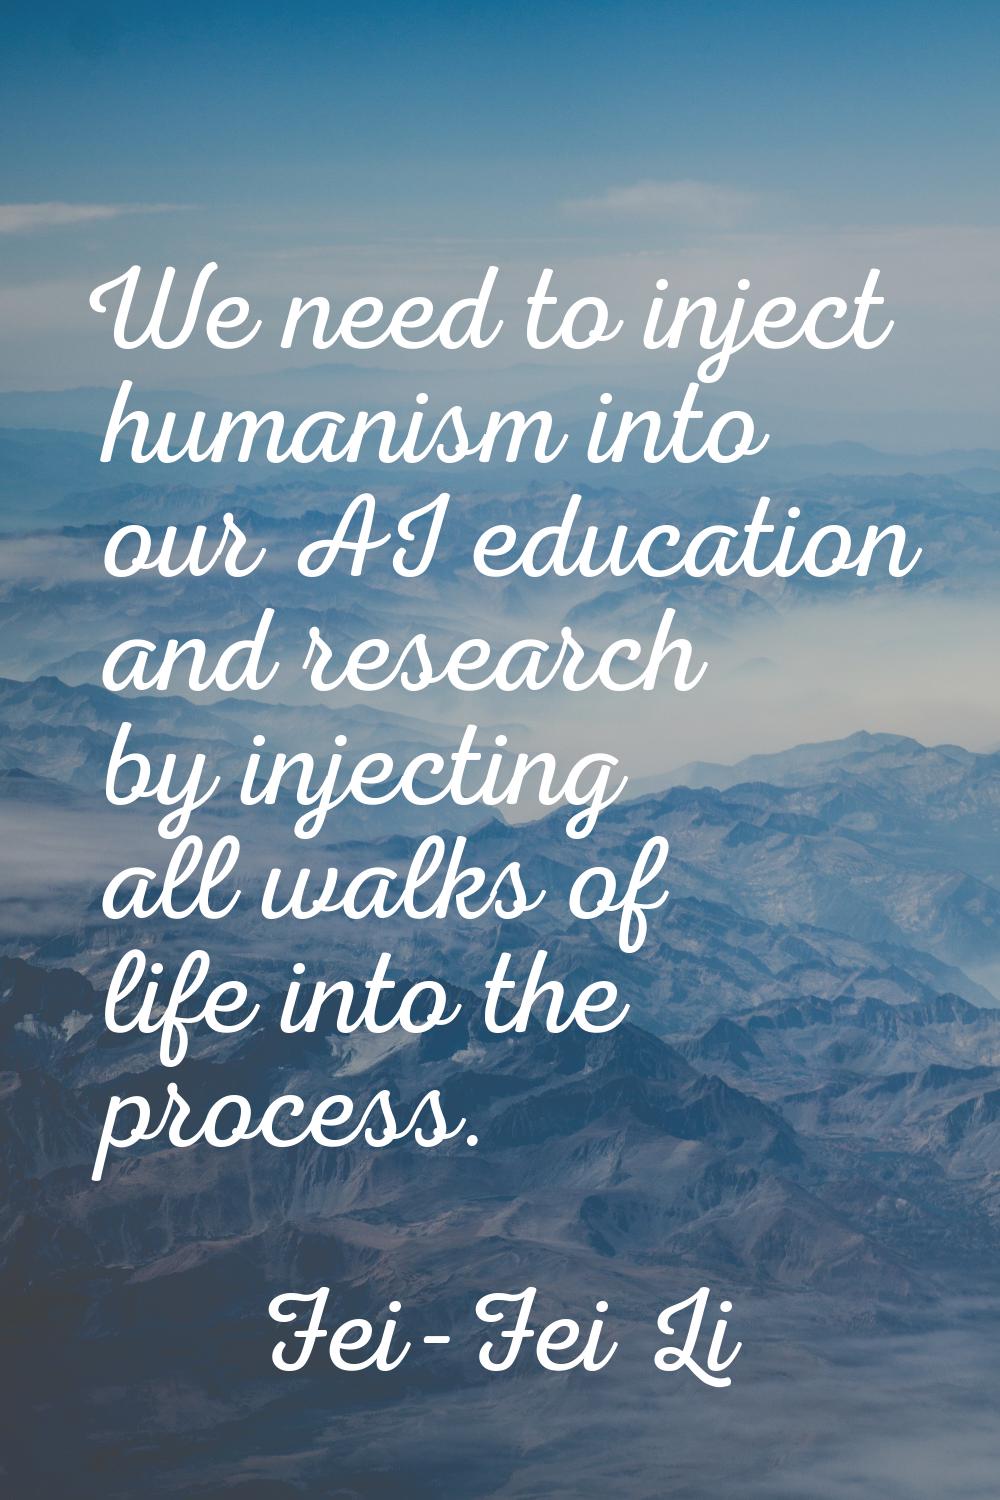 We need to inject humanism into our AI education and research by injecting all walks of life into t